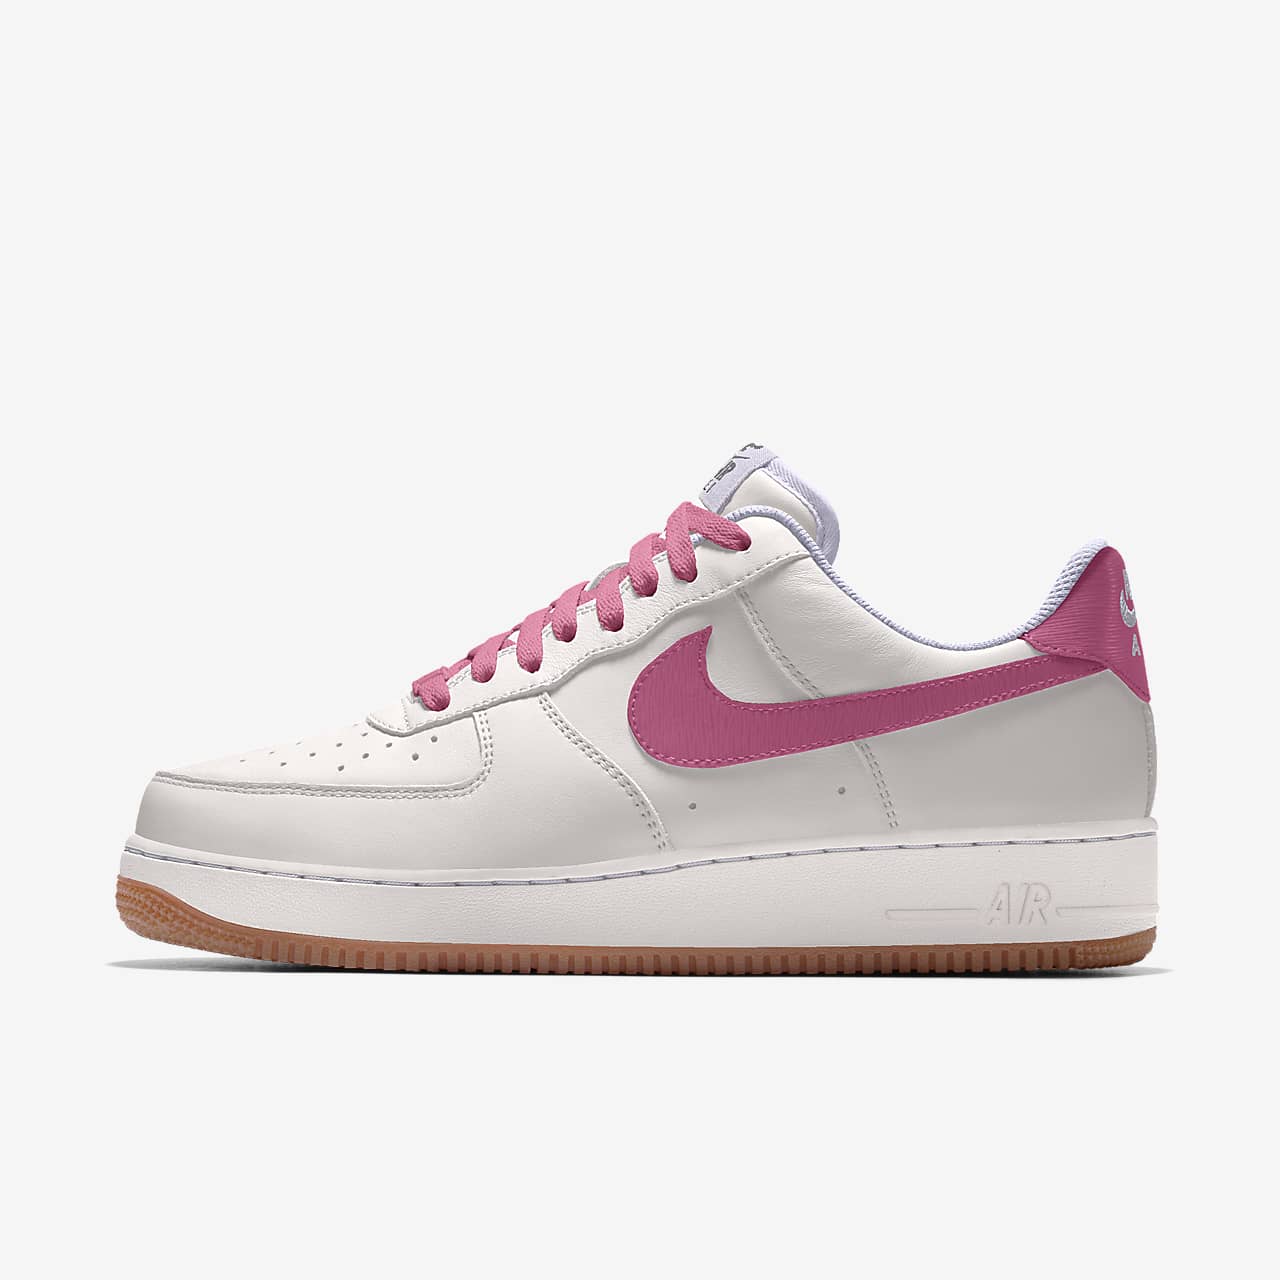 Chaussure personnalisable Nike Air Force 1 Low By You pour Femme ...